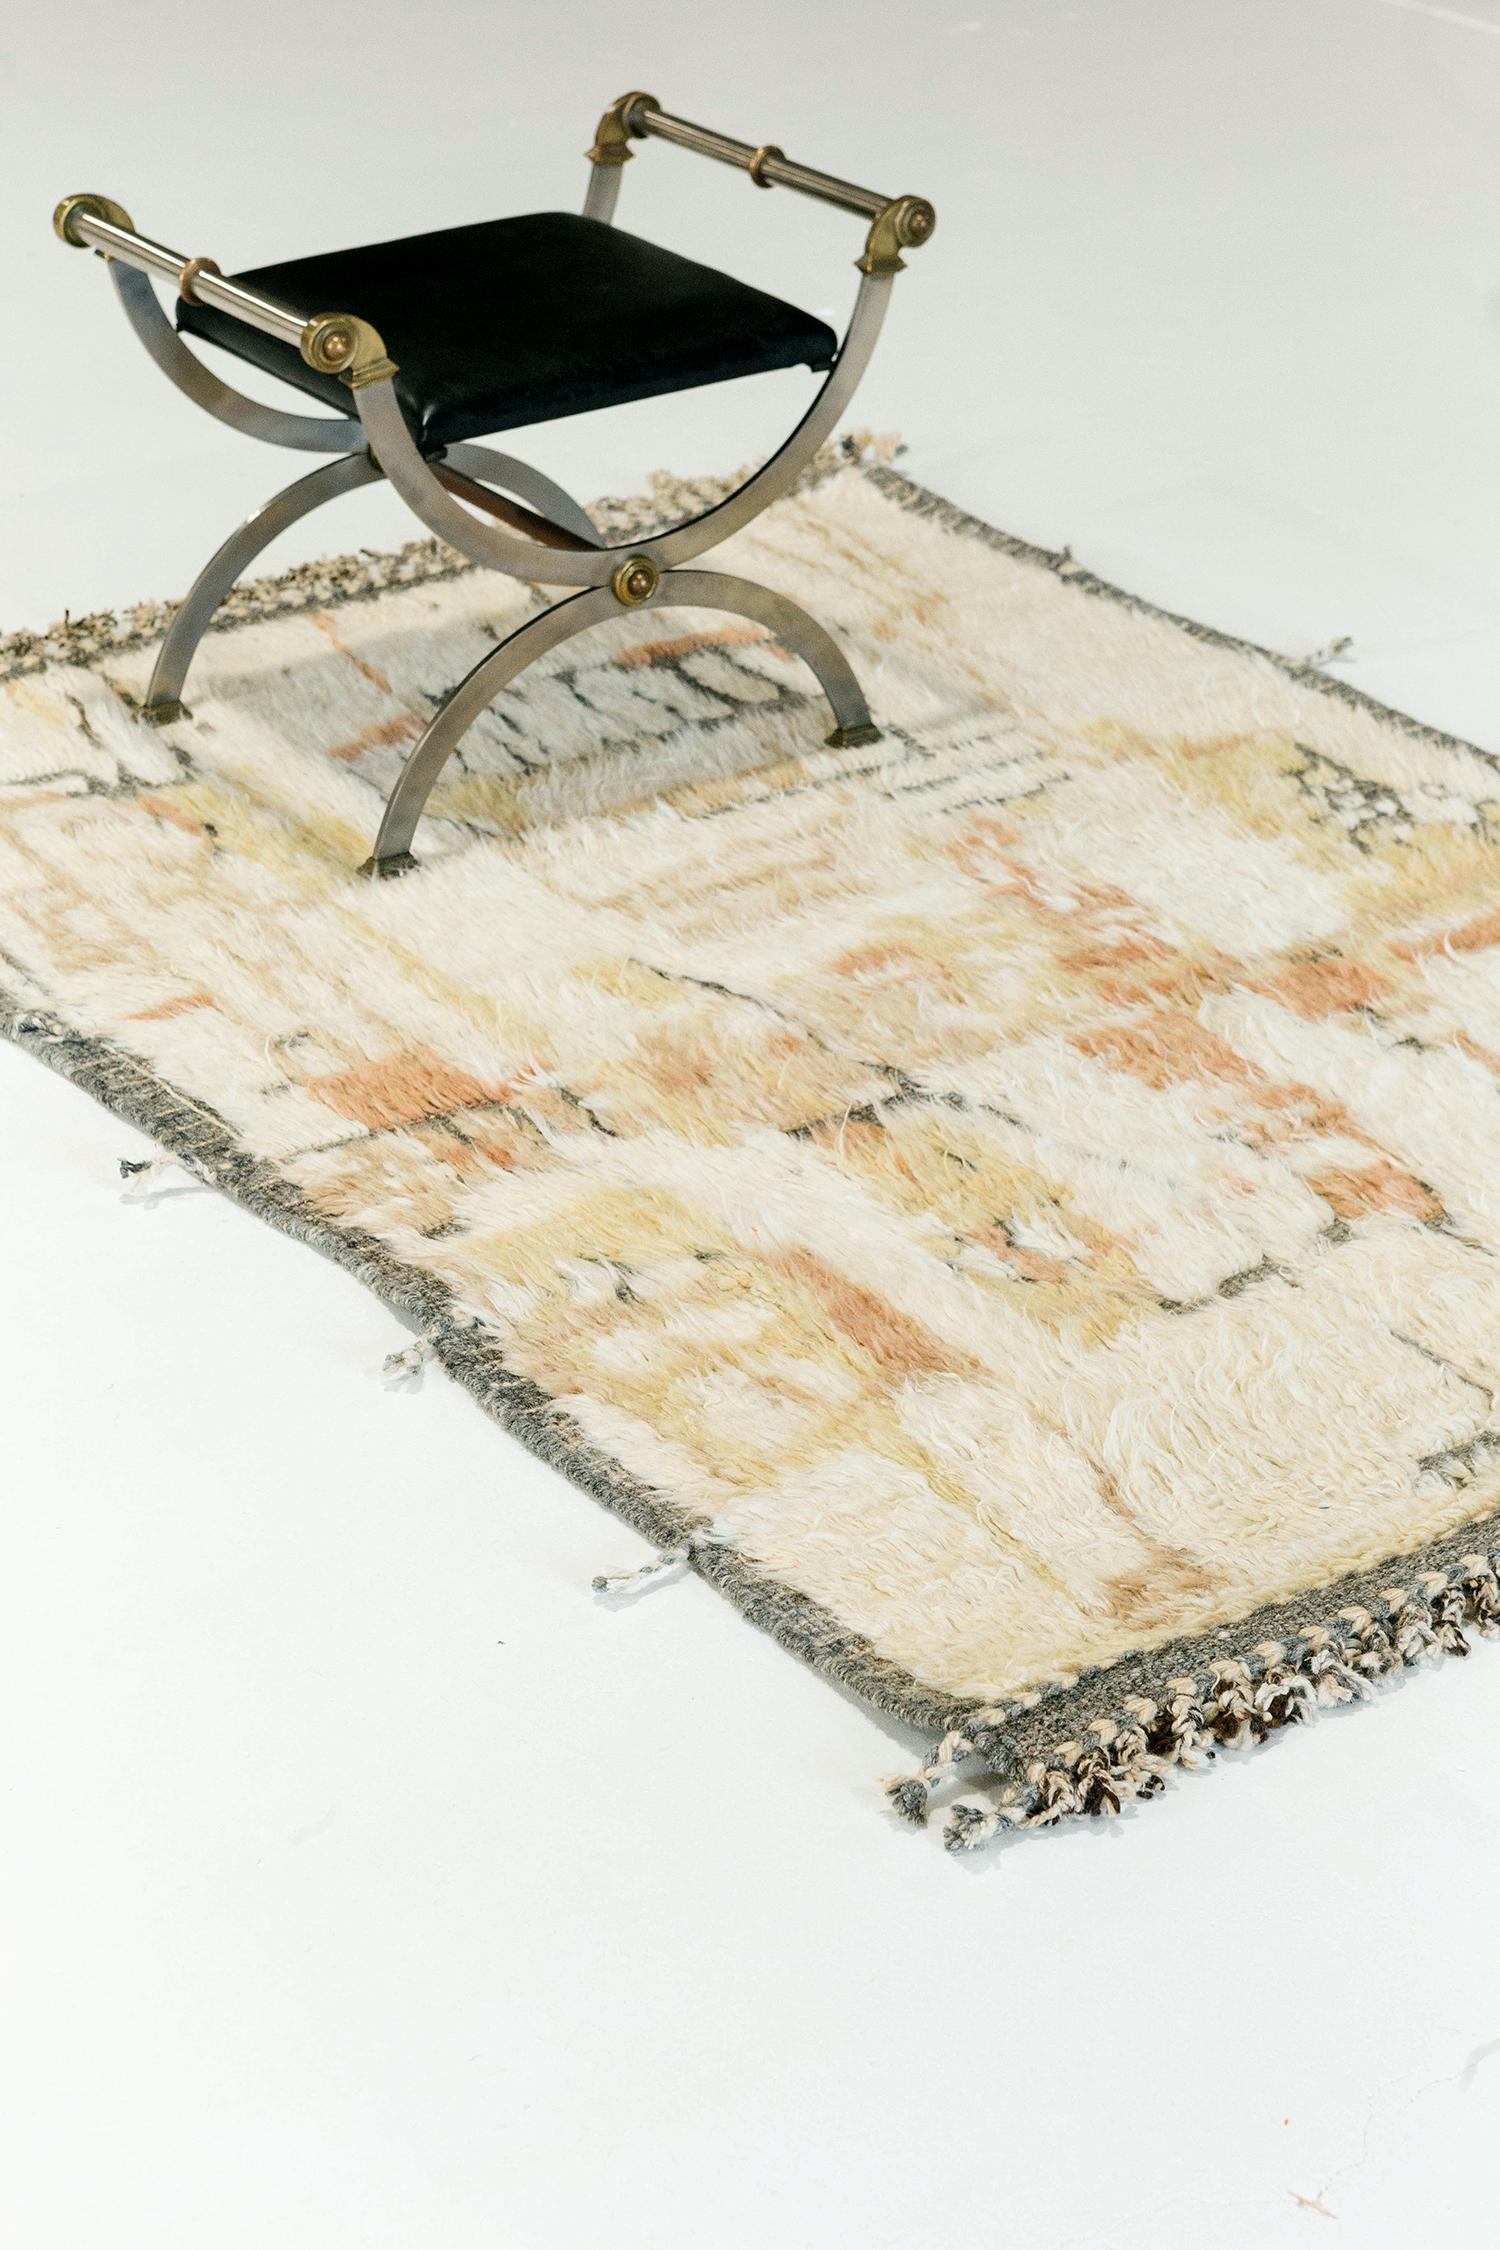 Meliska' is a beautifully textured rug with irregular motifs inspired from the Atlas Mountains of Morocco. Natural blush, golden yellow, and Sedona red surrounded by ivory shag work cohesively to make for a great contemporary interpretation for the